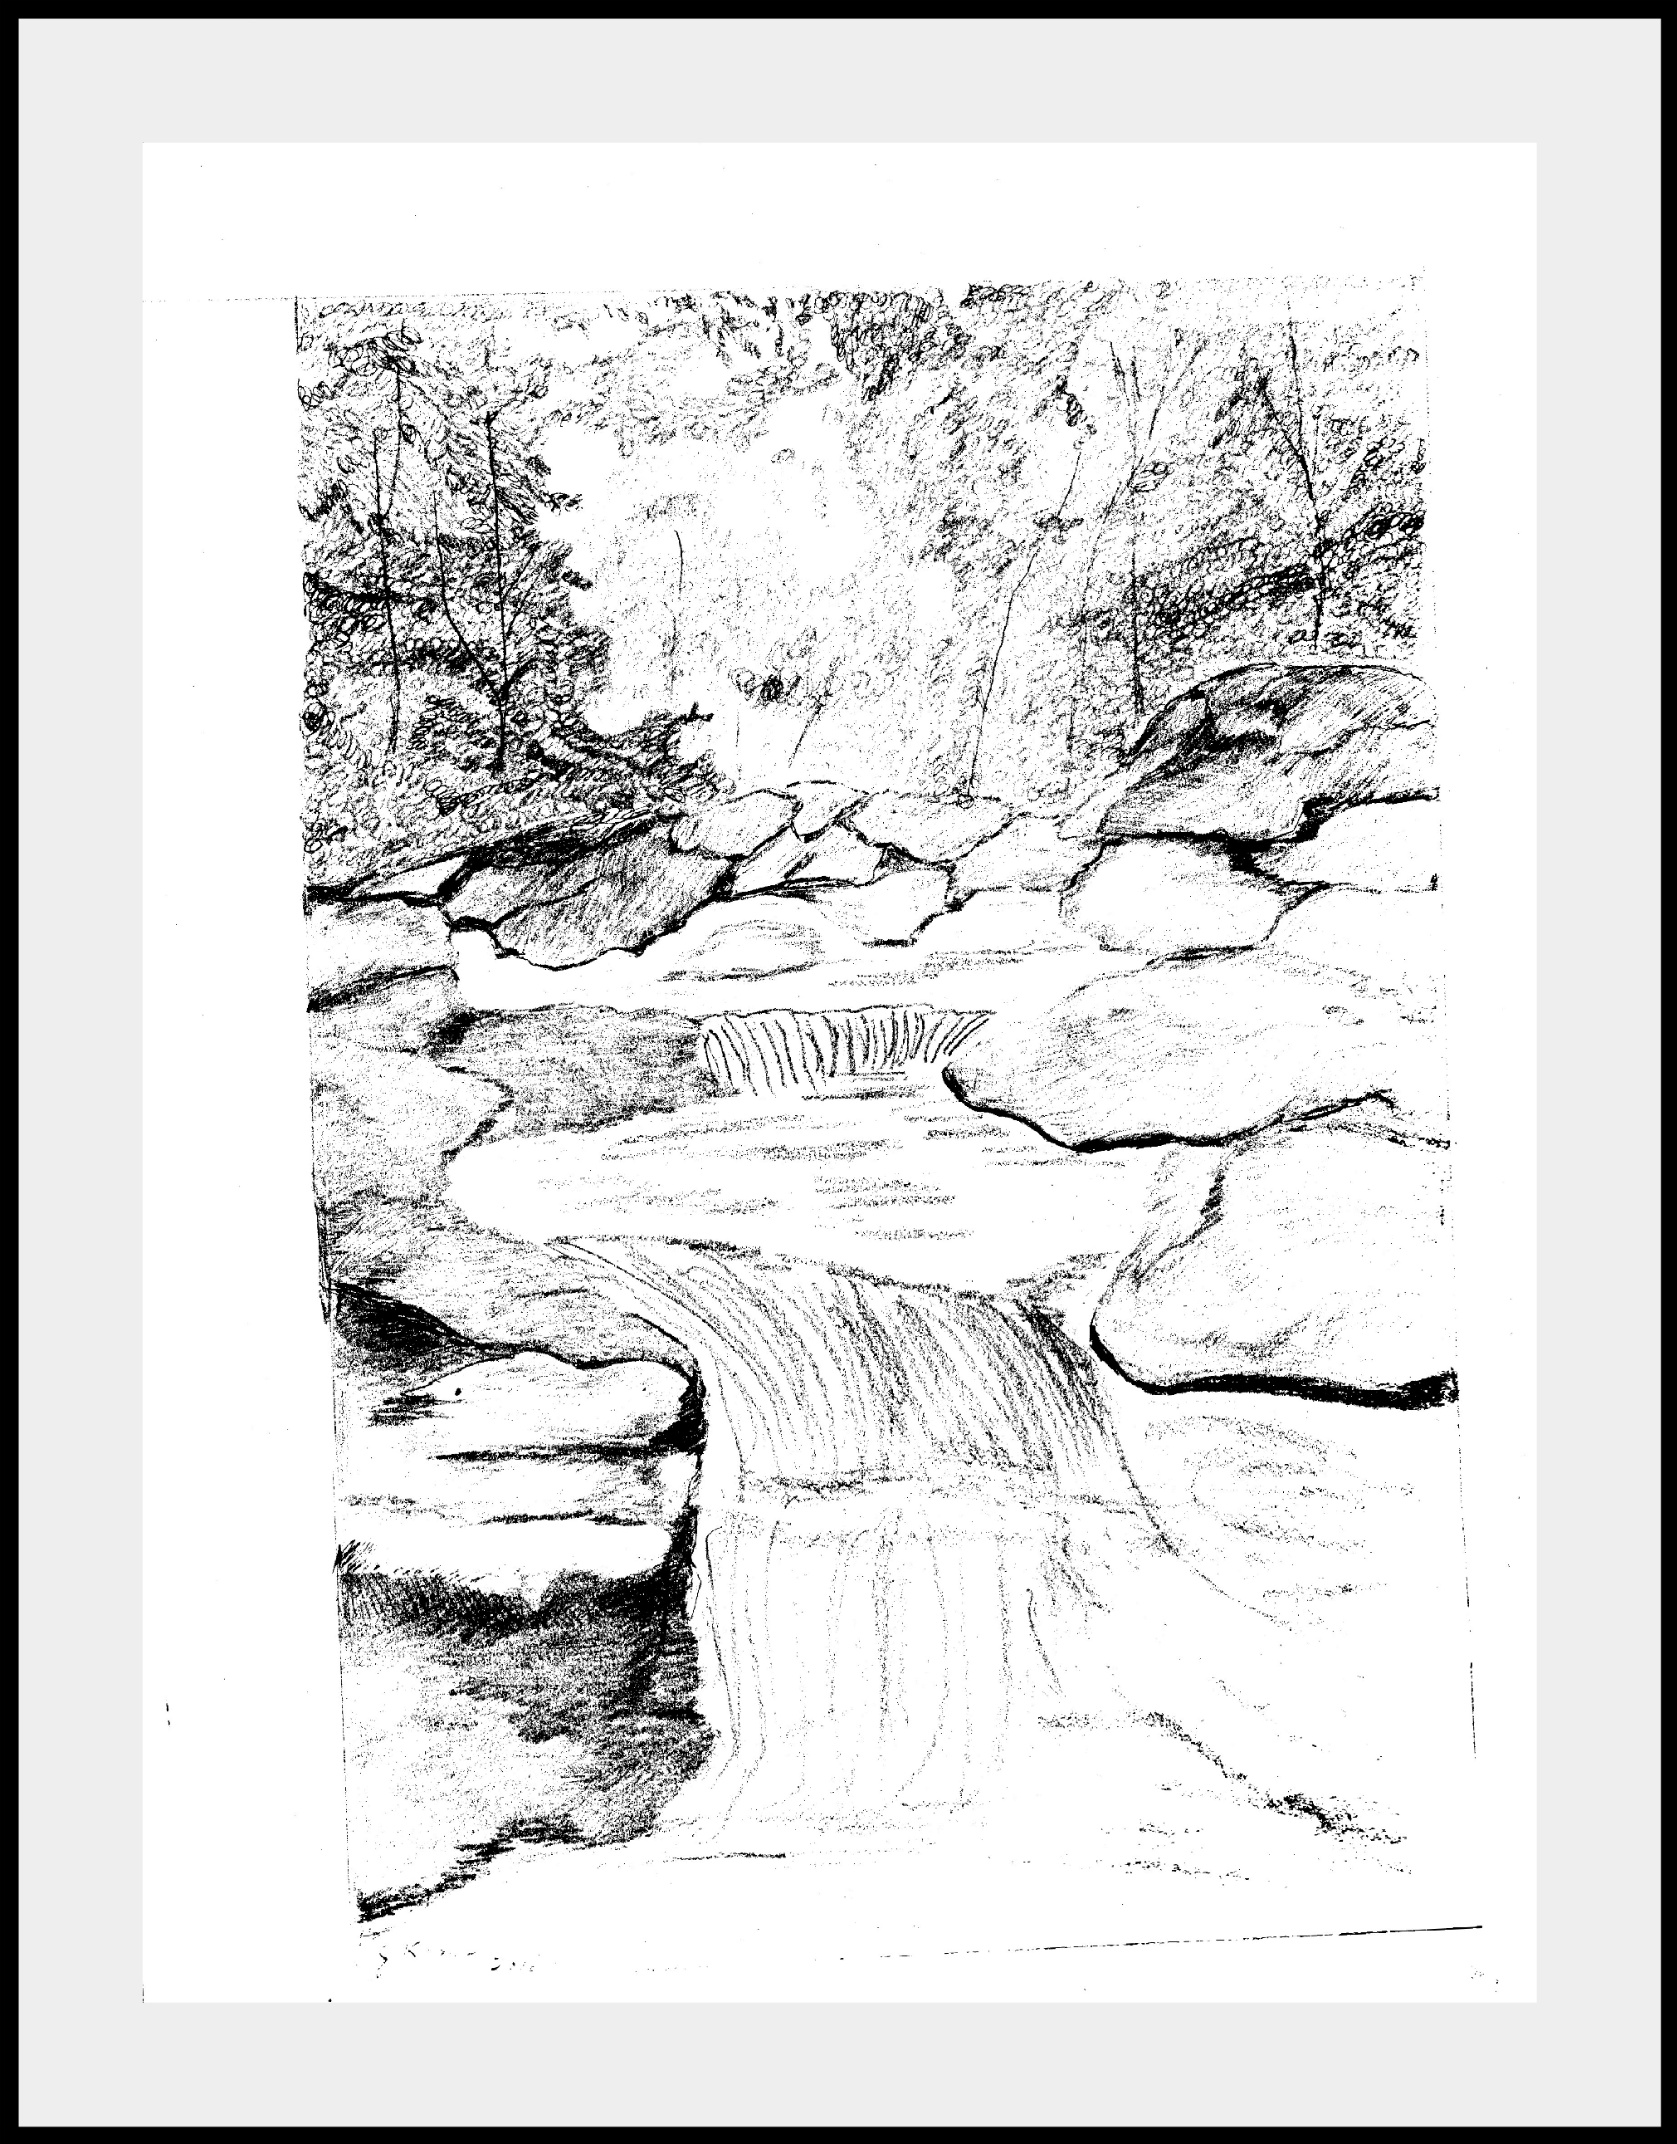 How to Draw a Landscape: Narrated Pencil Drawing - YouTube